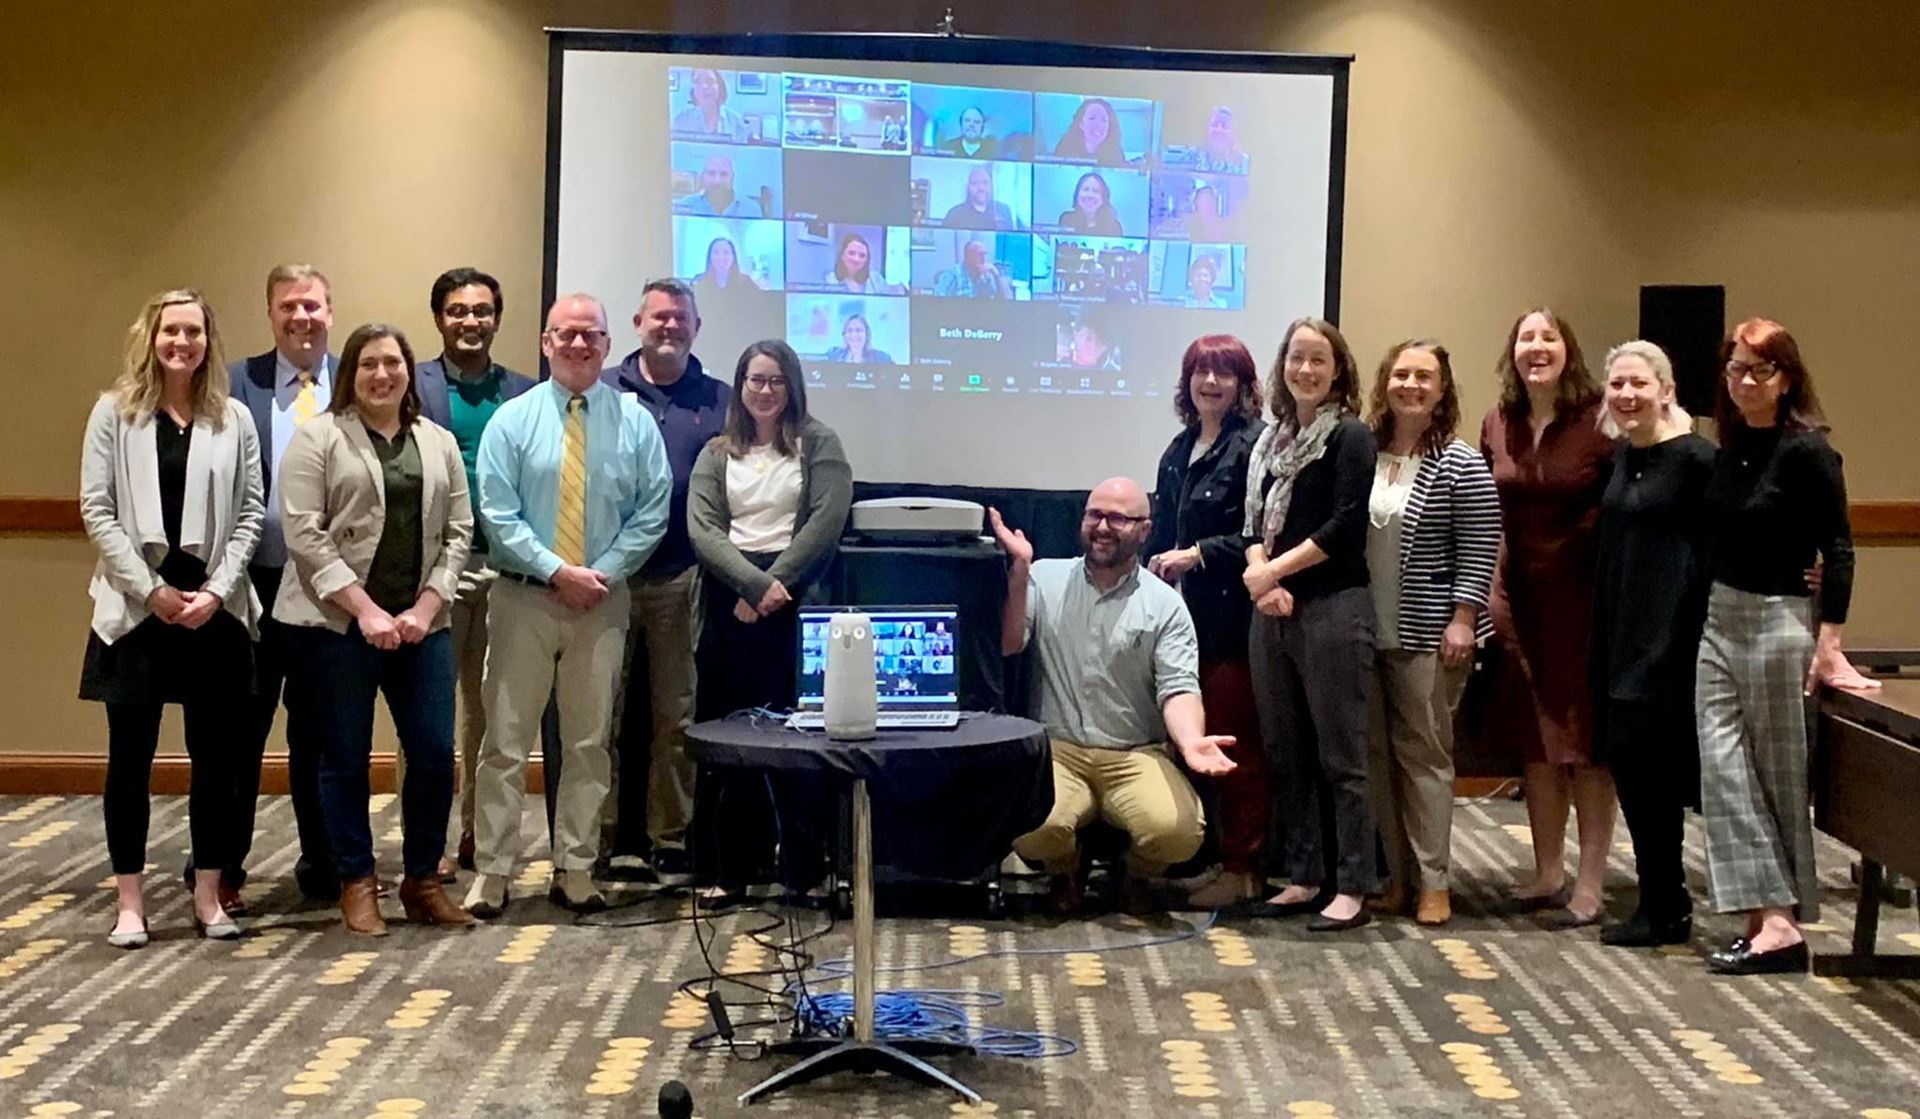 A picture of the SEMC2022 Program Committee in Rogers, Arizona. Everyone smiles at the camera and the projector screen shows the virtual attendees over Zoom. 